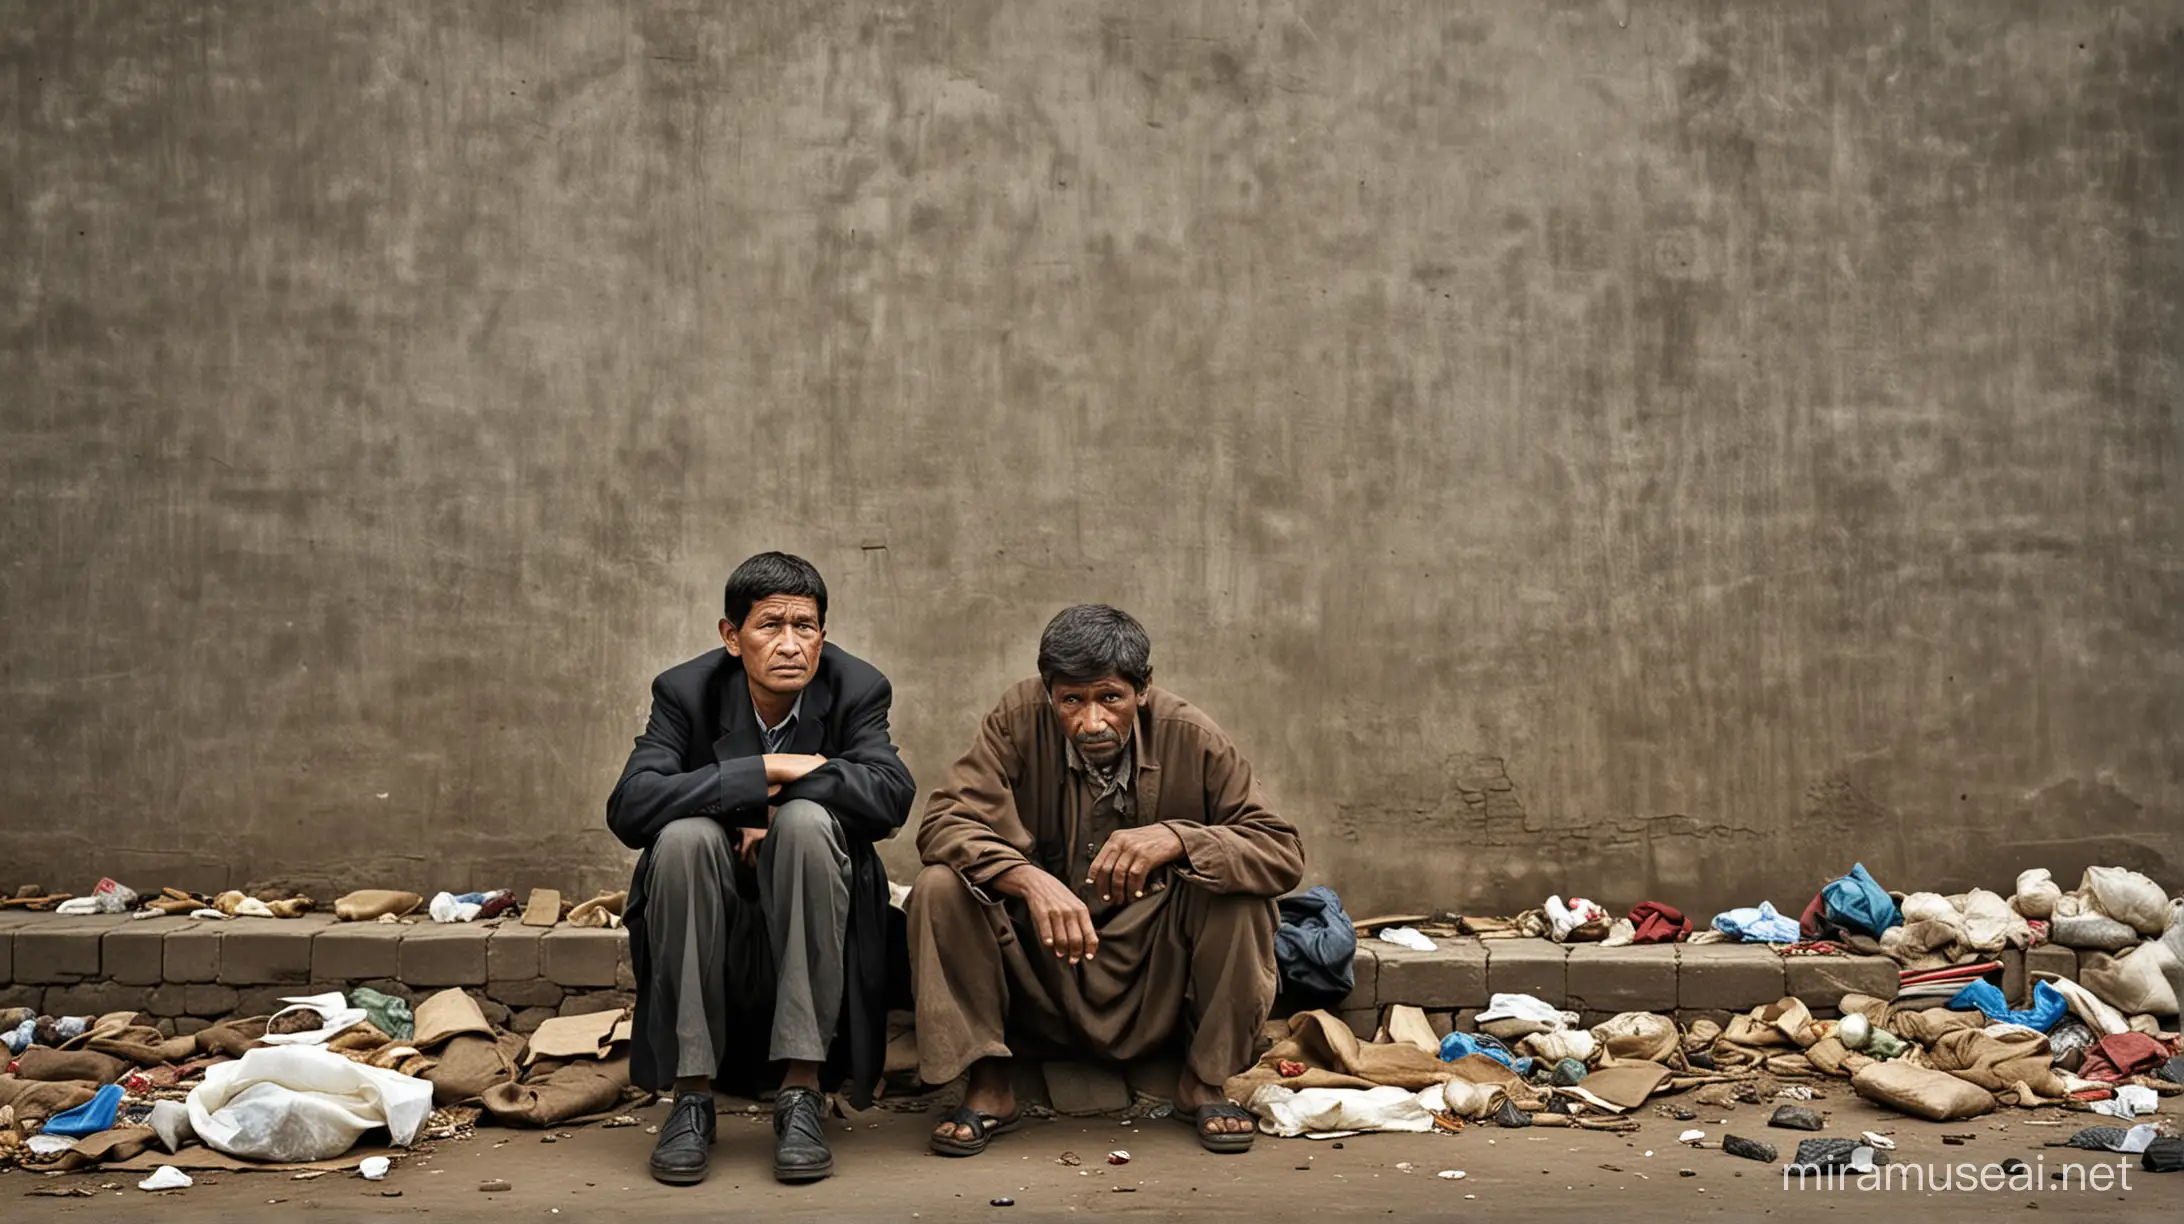 Contrasting Realities Images of Poverty Amidst Promises of Progress